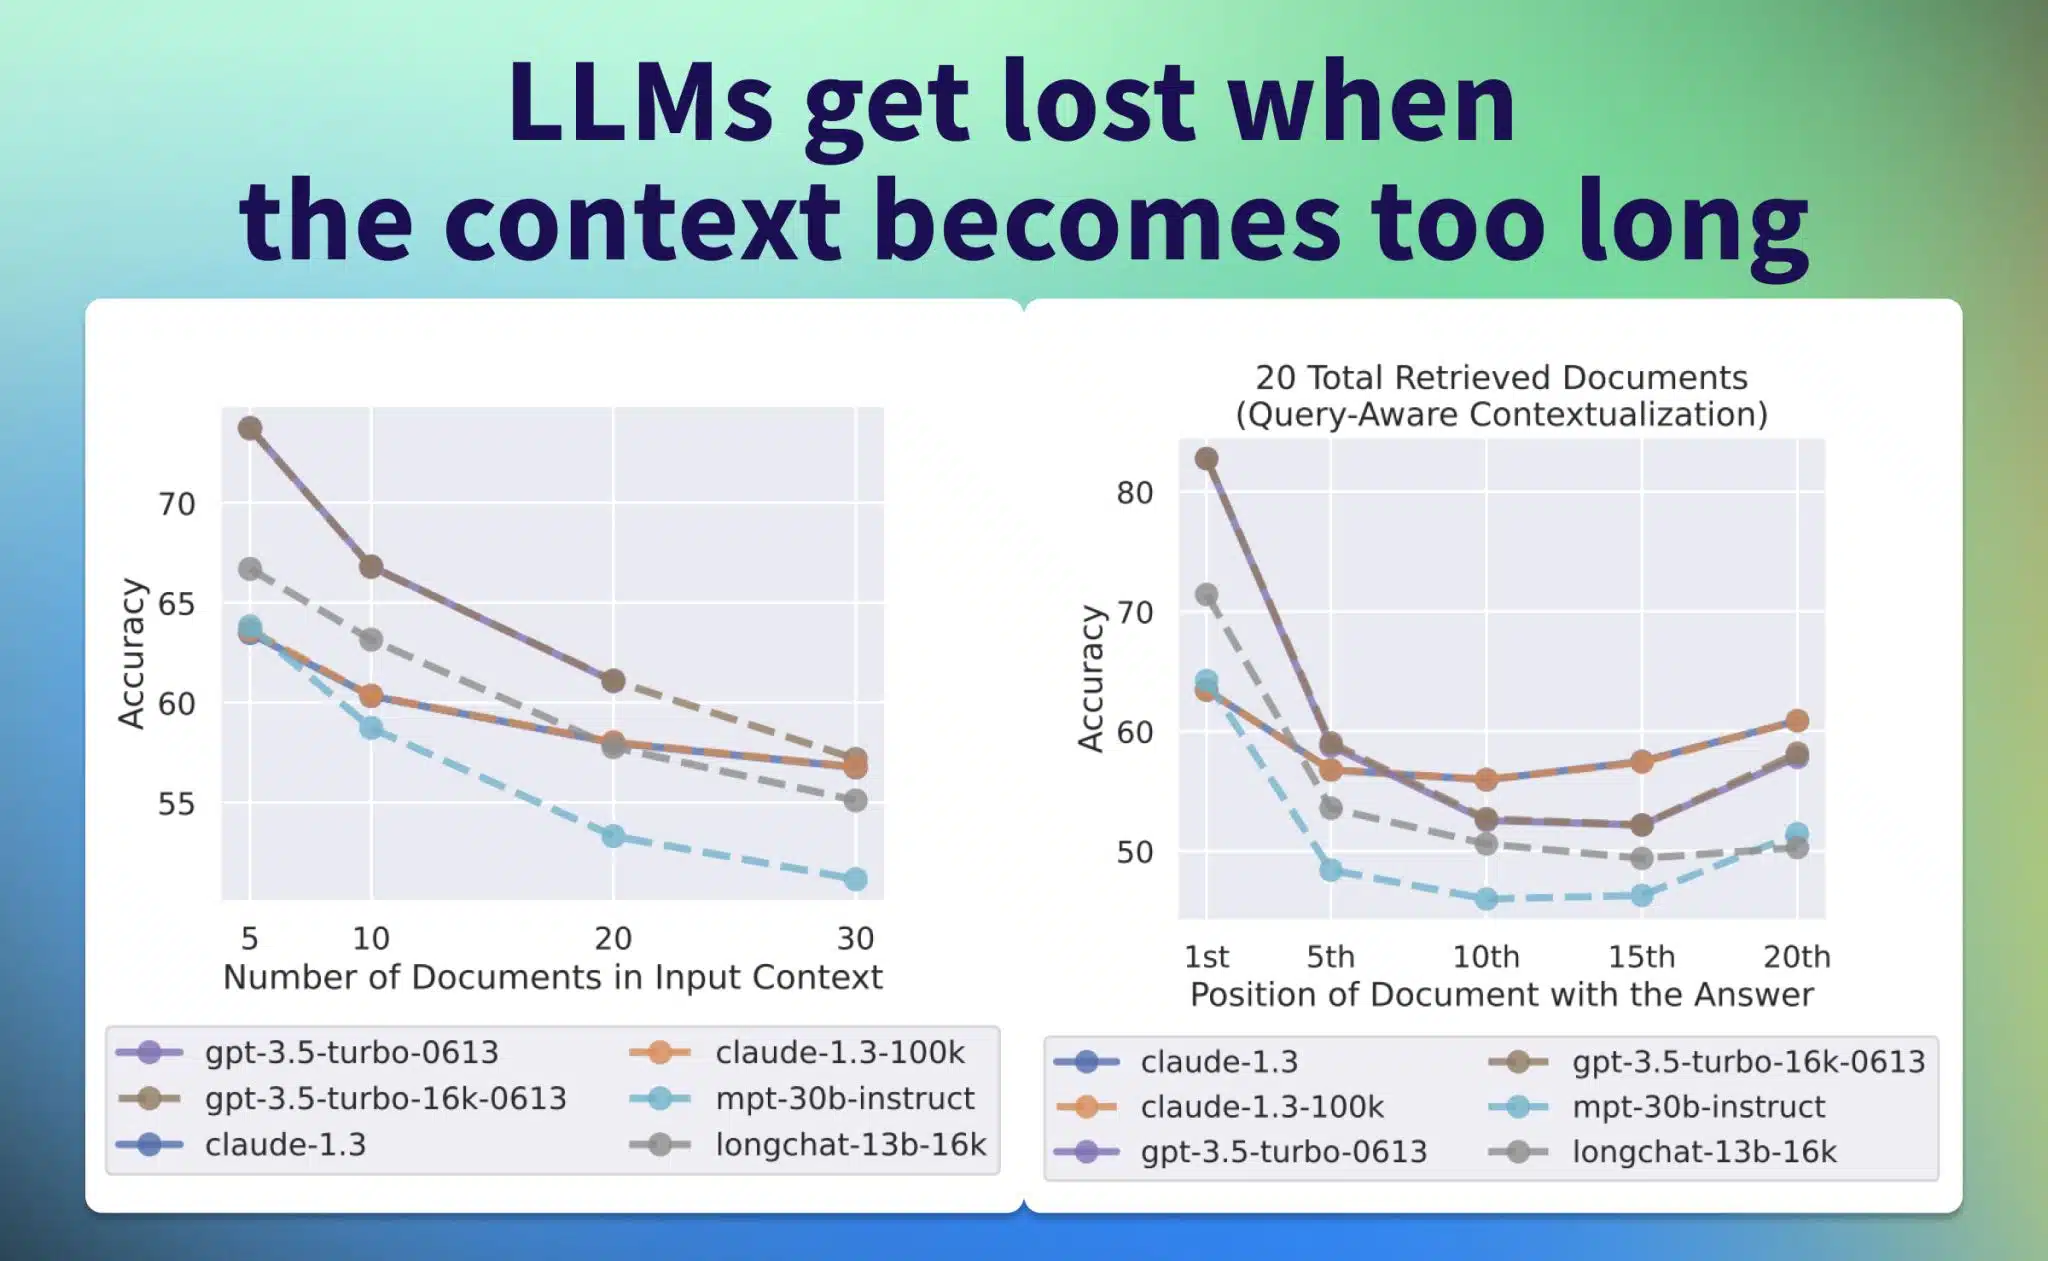 LLMs get lost when the context becomes too long